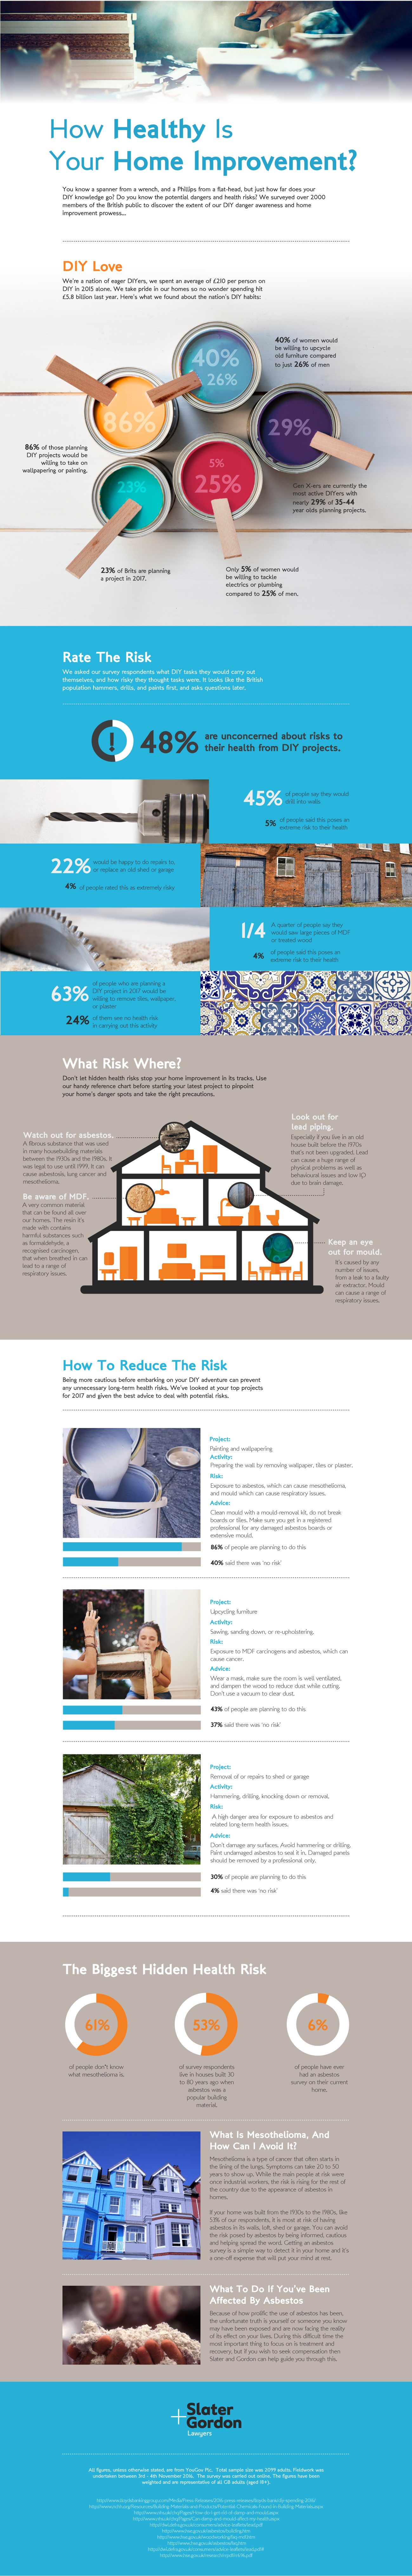 Dangers of DIY, what you need to know before renovating